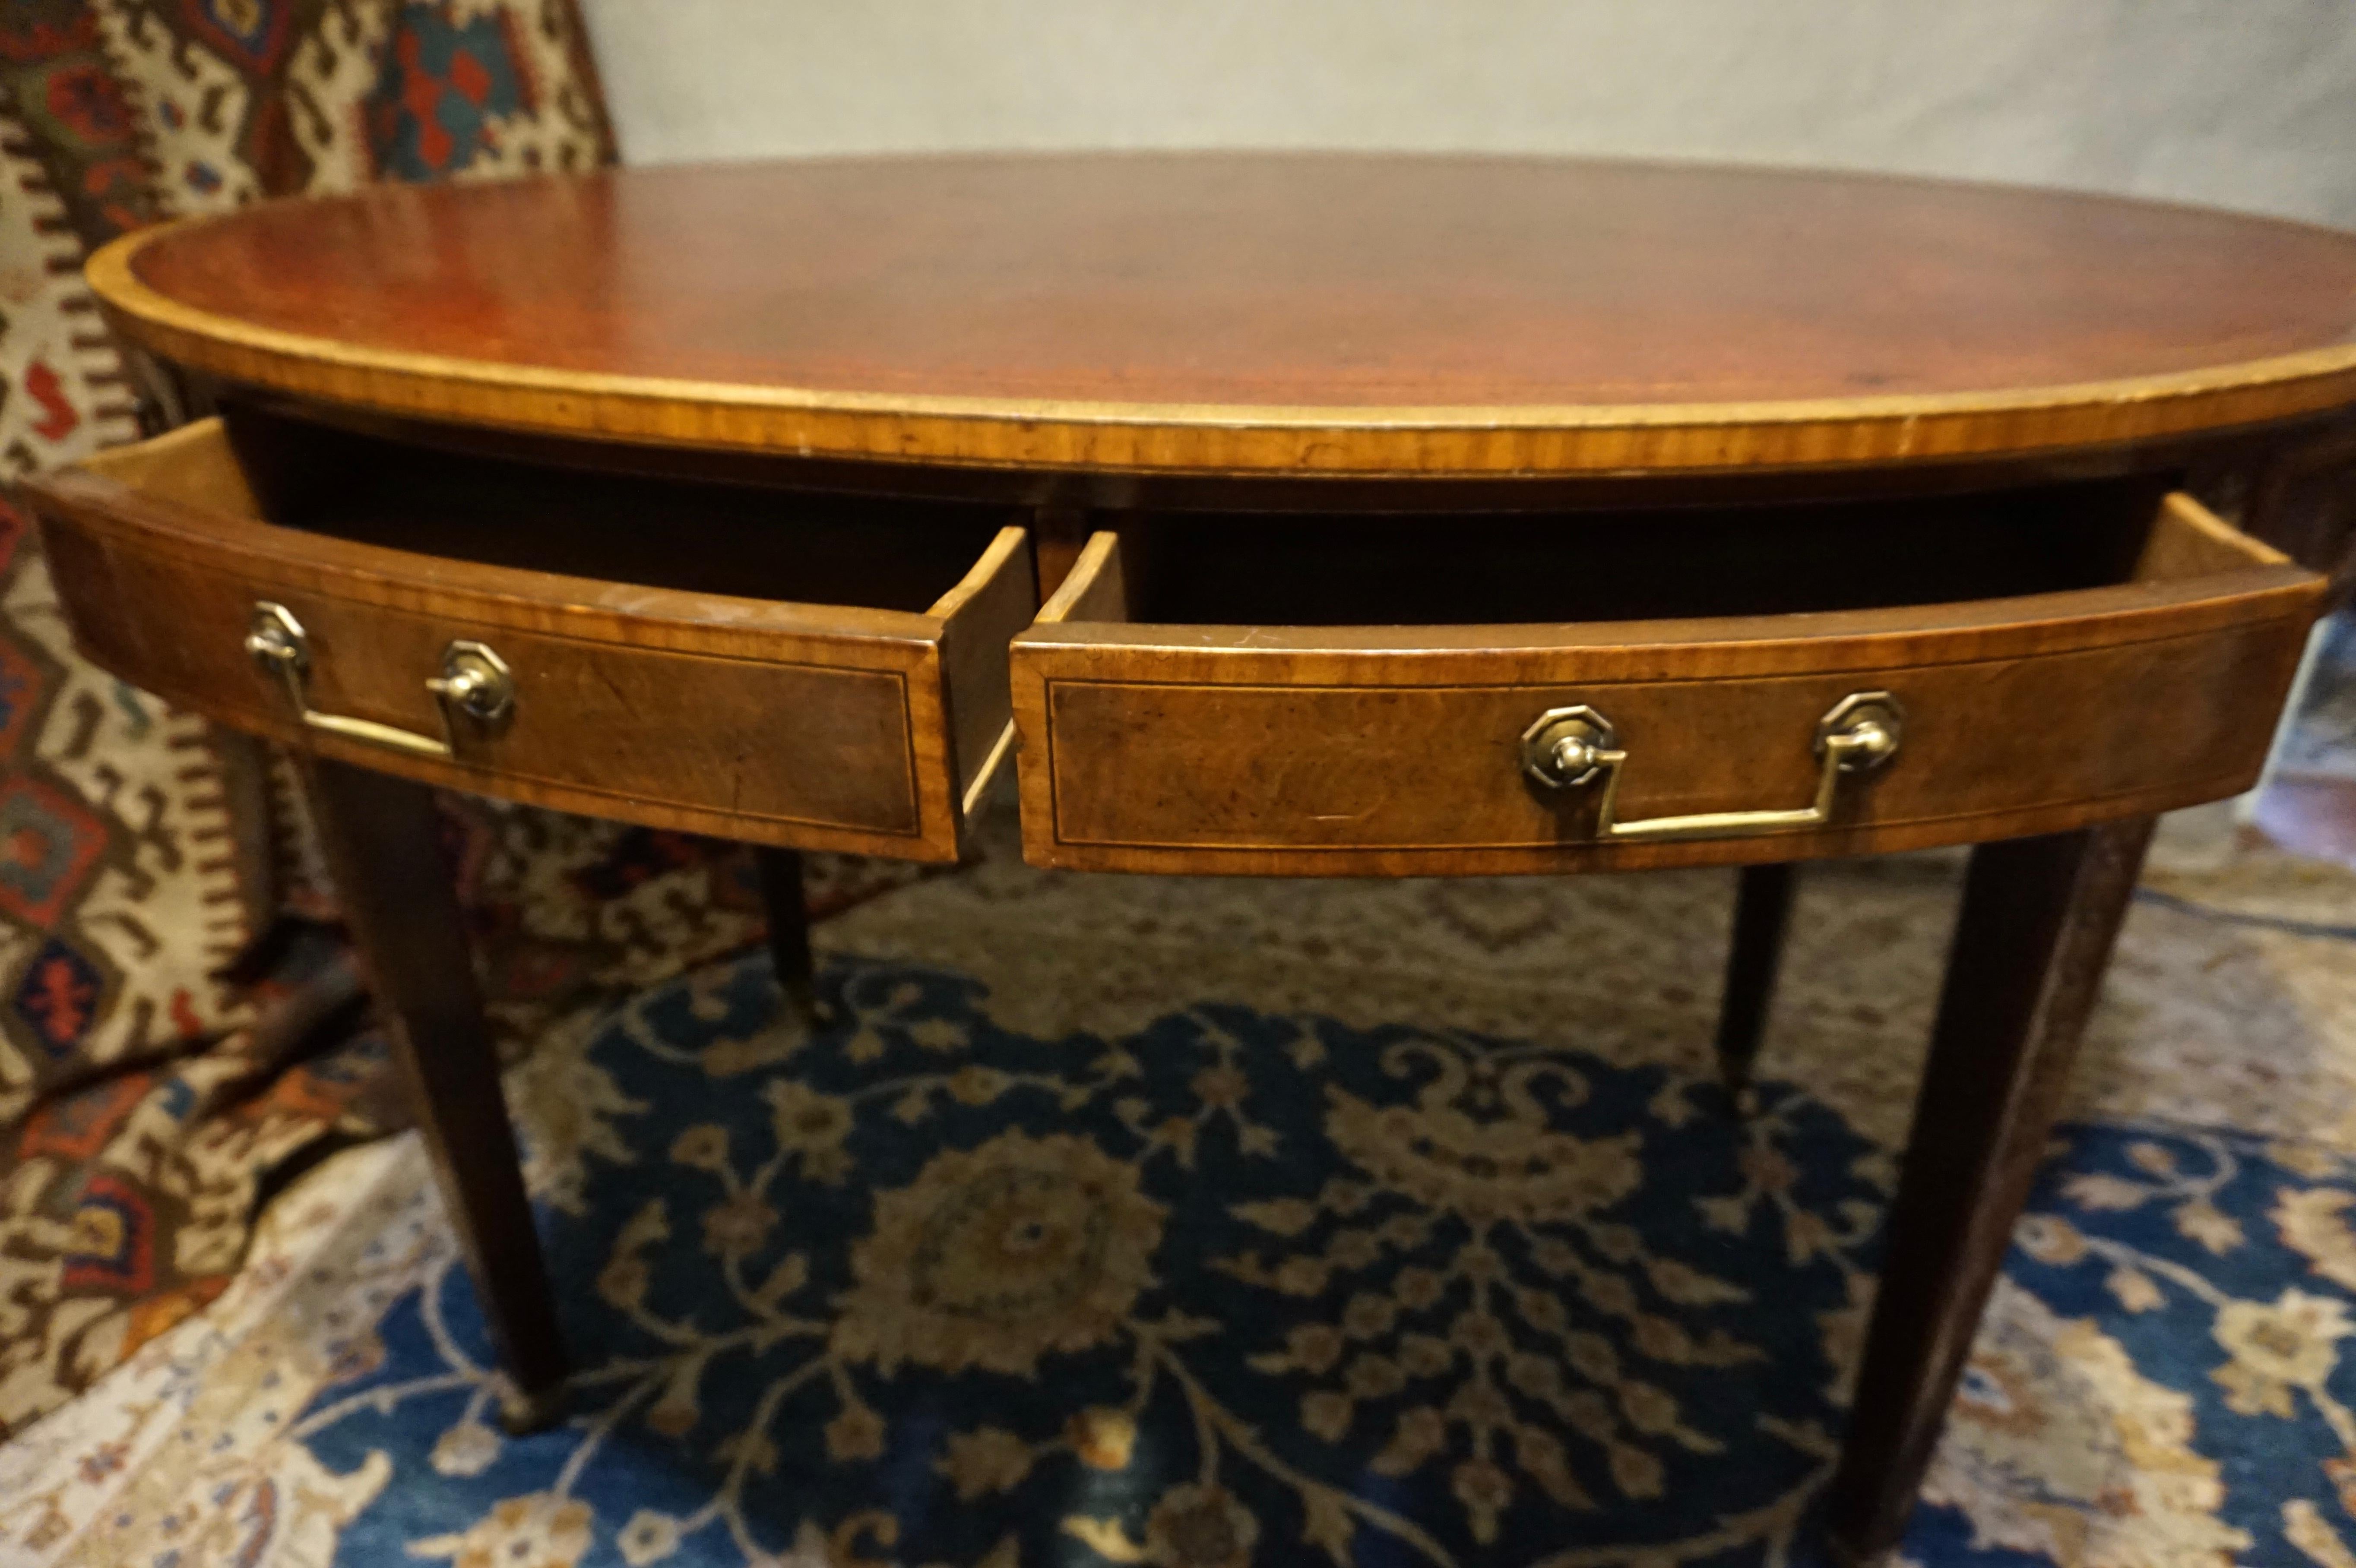 English Regency Revival Mahogany Oval Table with Gilt Leather Top 3